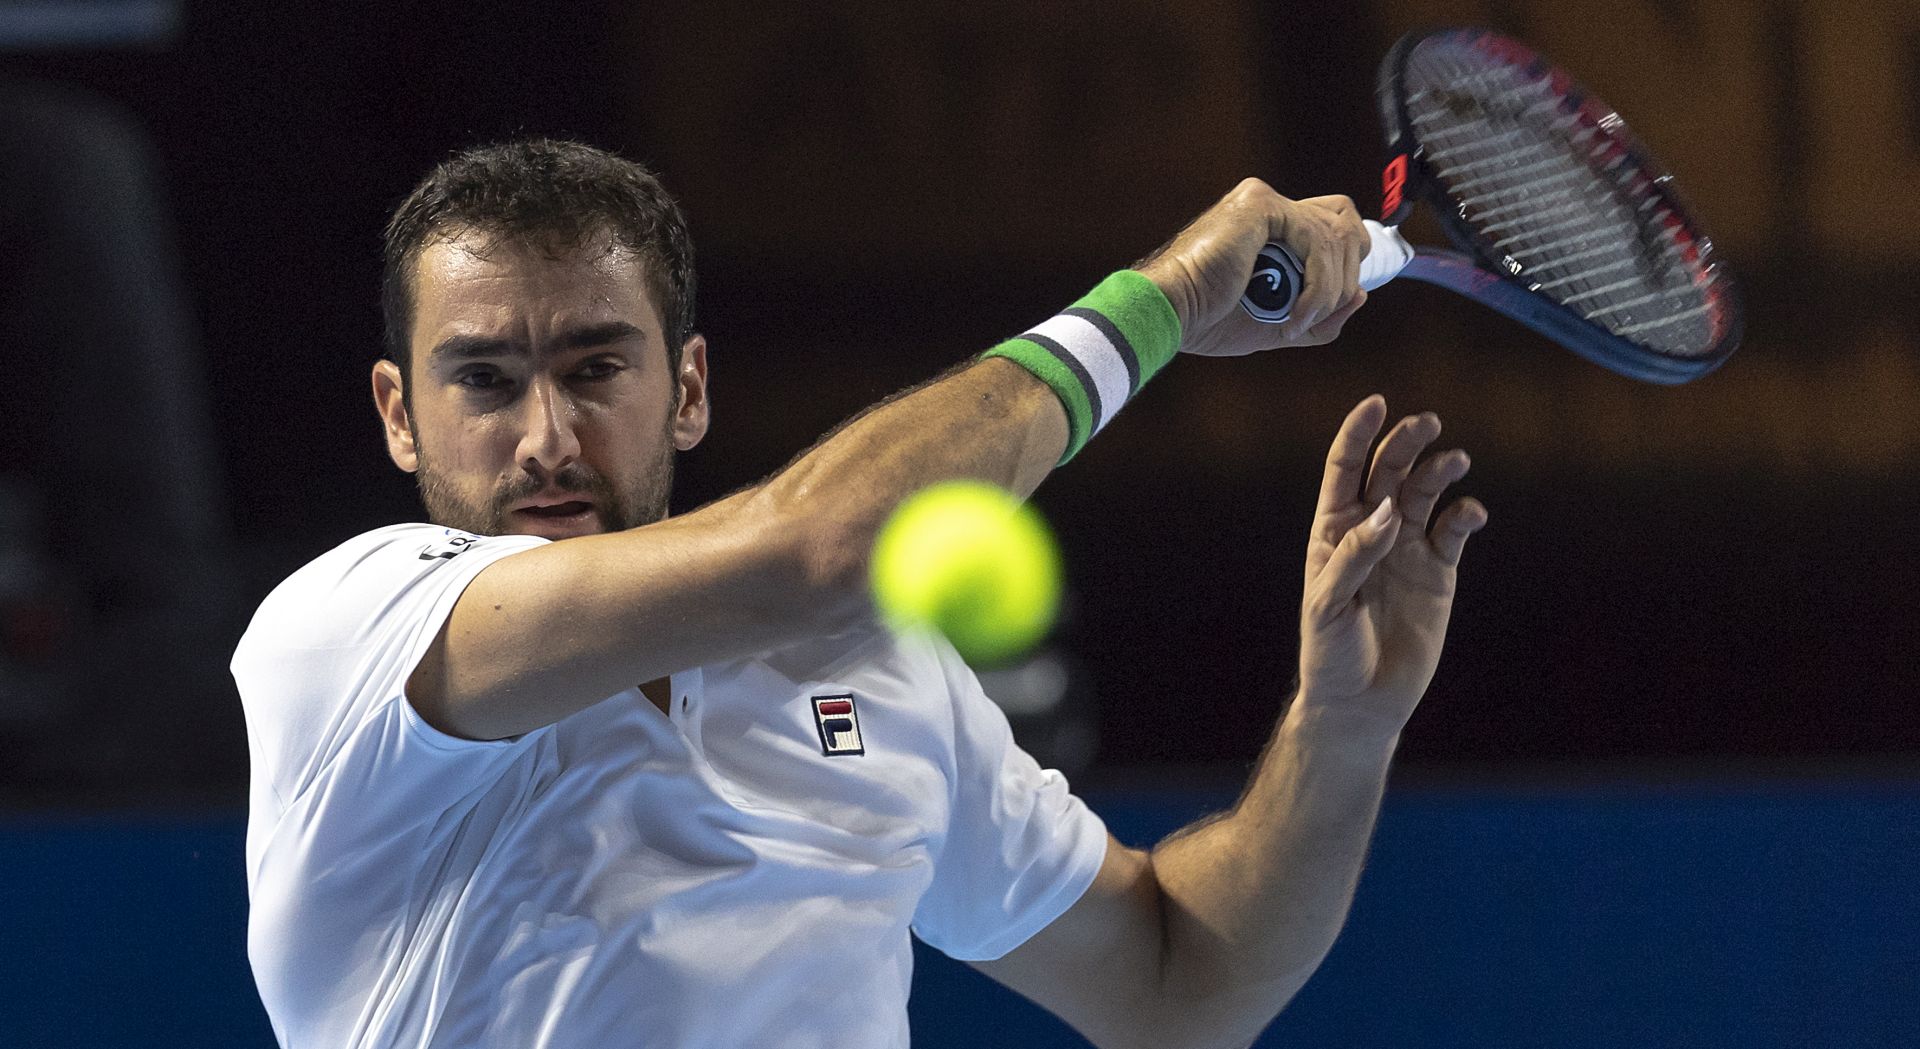 epa07111992 Croatia's Marin Cilic in action during his first round match against Canada's Denis Shapovalov at the Swiss Indoors tennis tournament at the St. Jakobshalle in Basel, Switzerland, 22 October 2018.  EPA/GEORGIOS KEFALAS